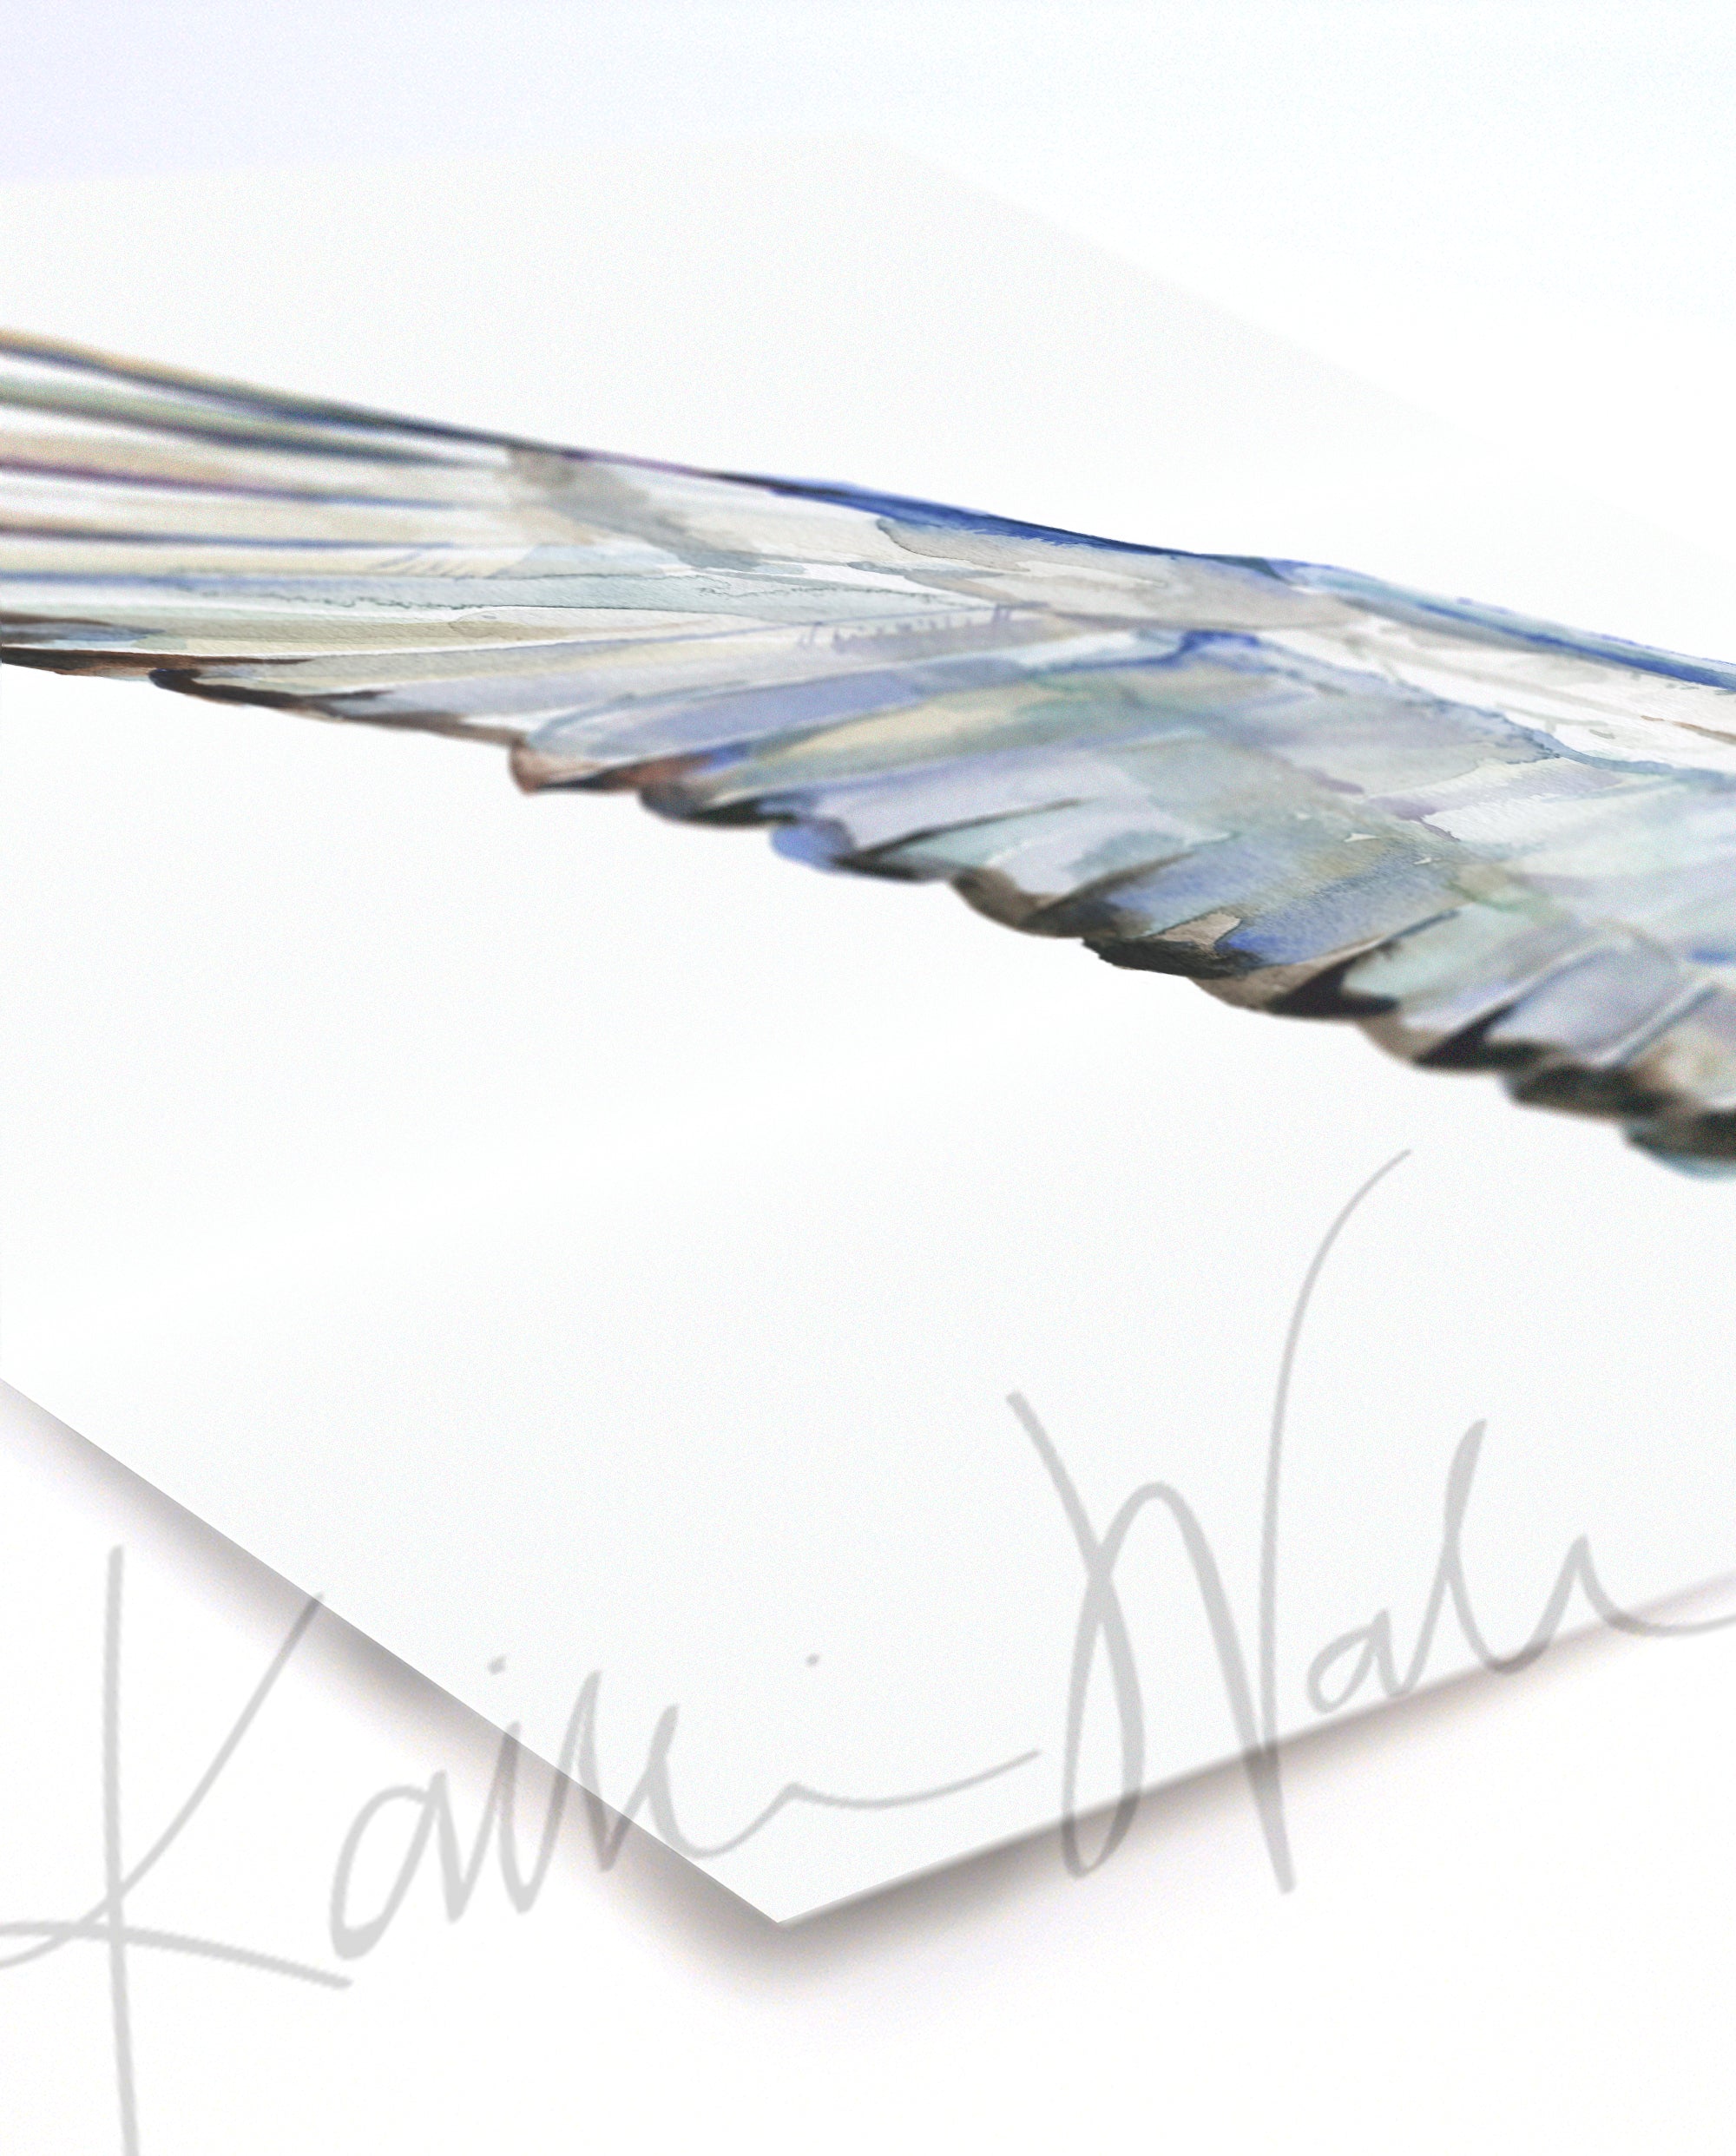 Unframed of a watercolor print of a crane's wings with white feathers, at an angle.